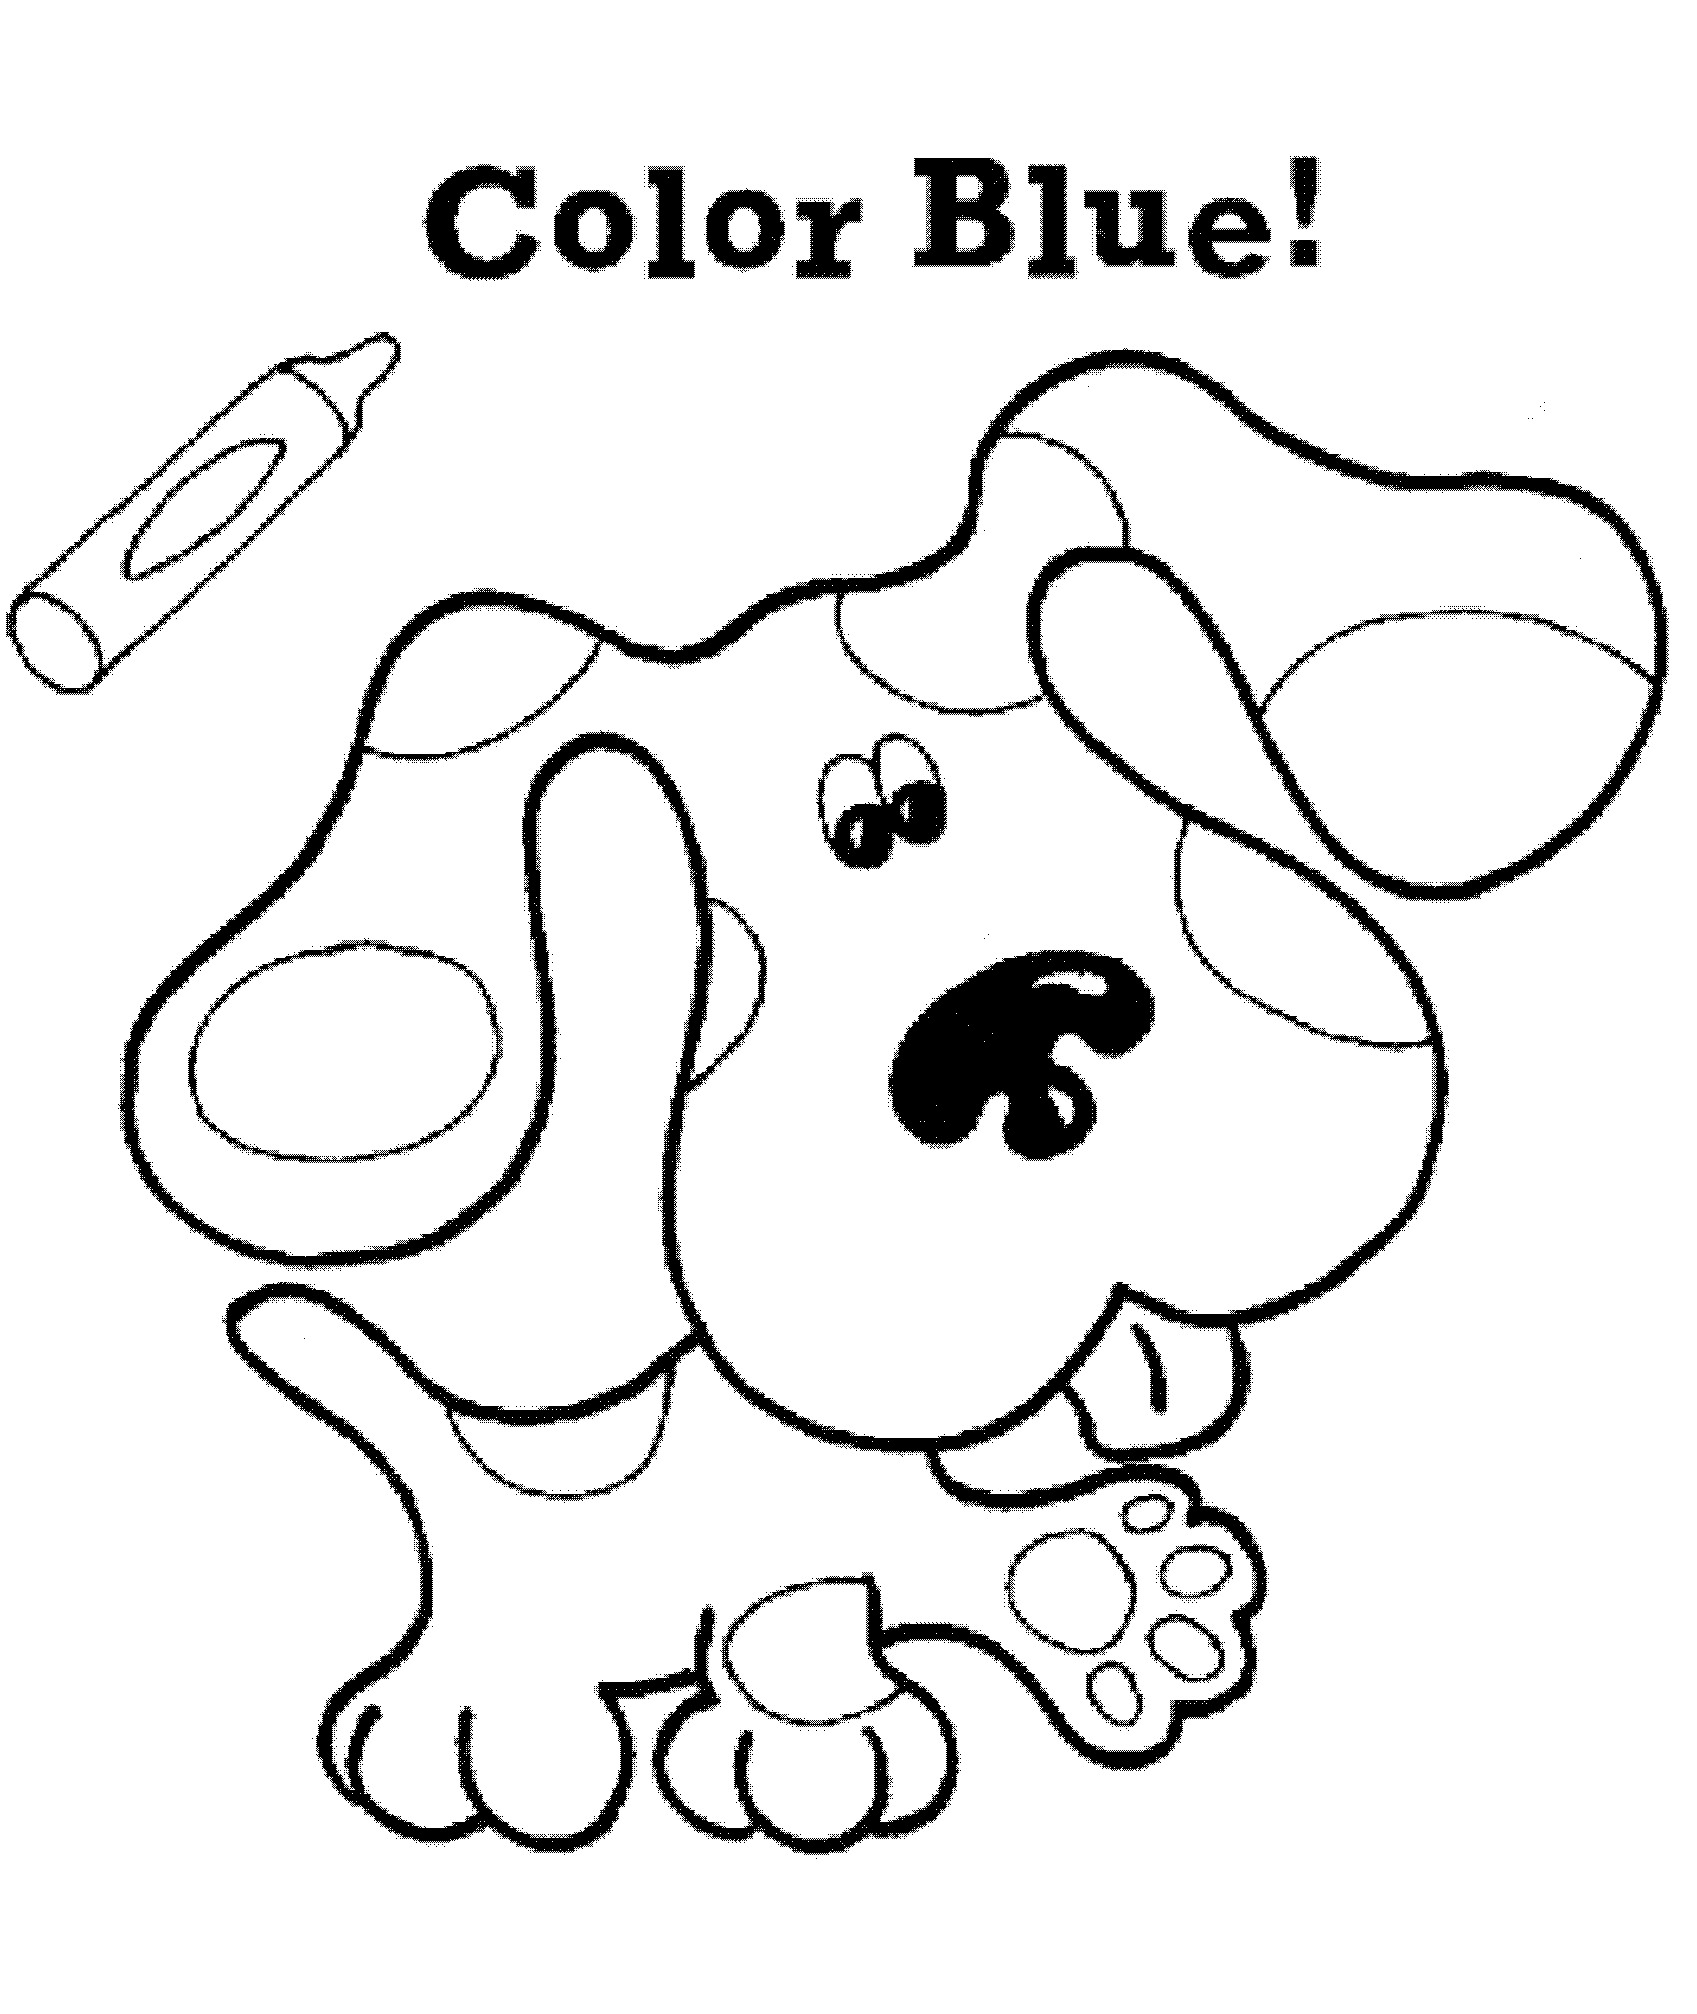 15 coloring pages of Blues Clues